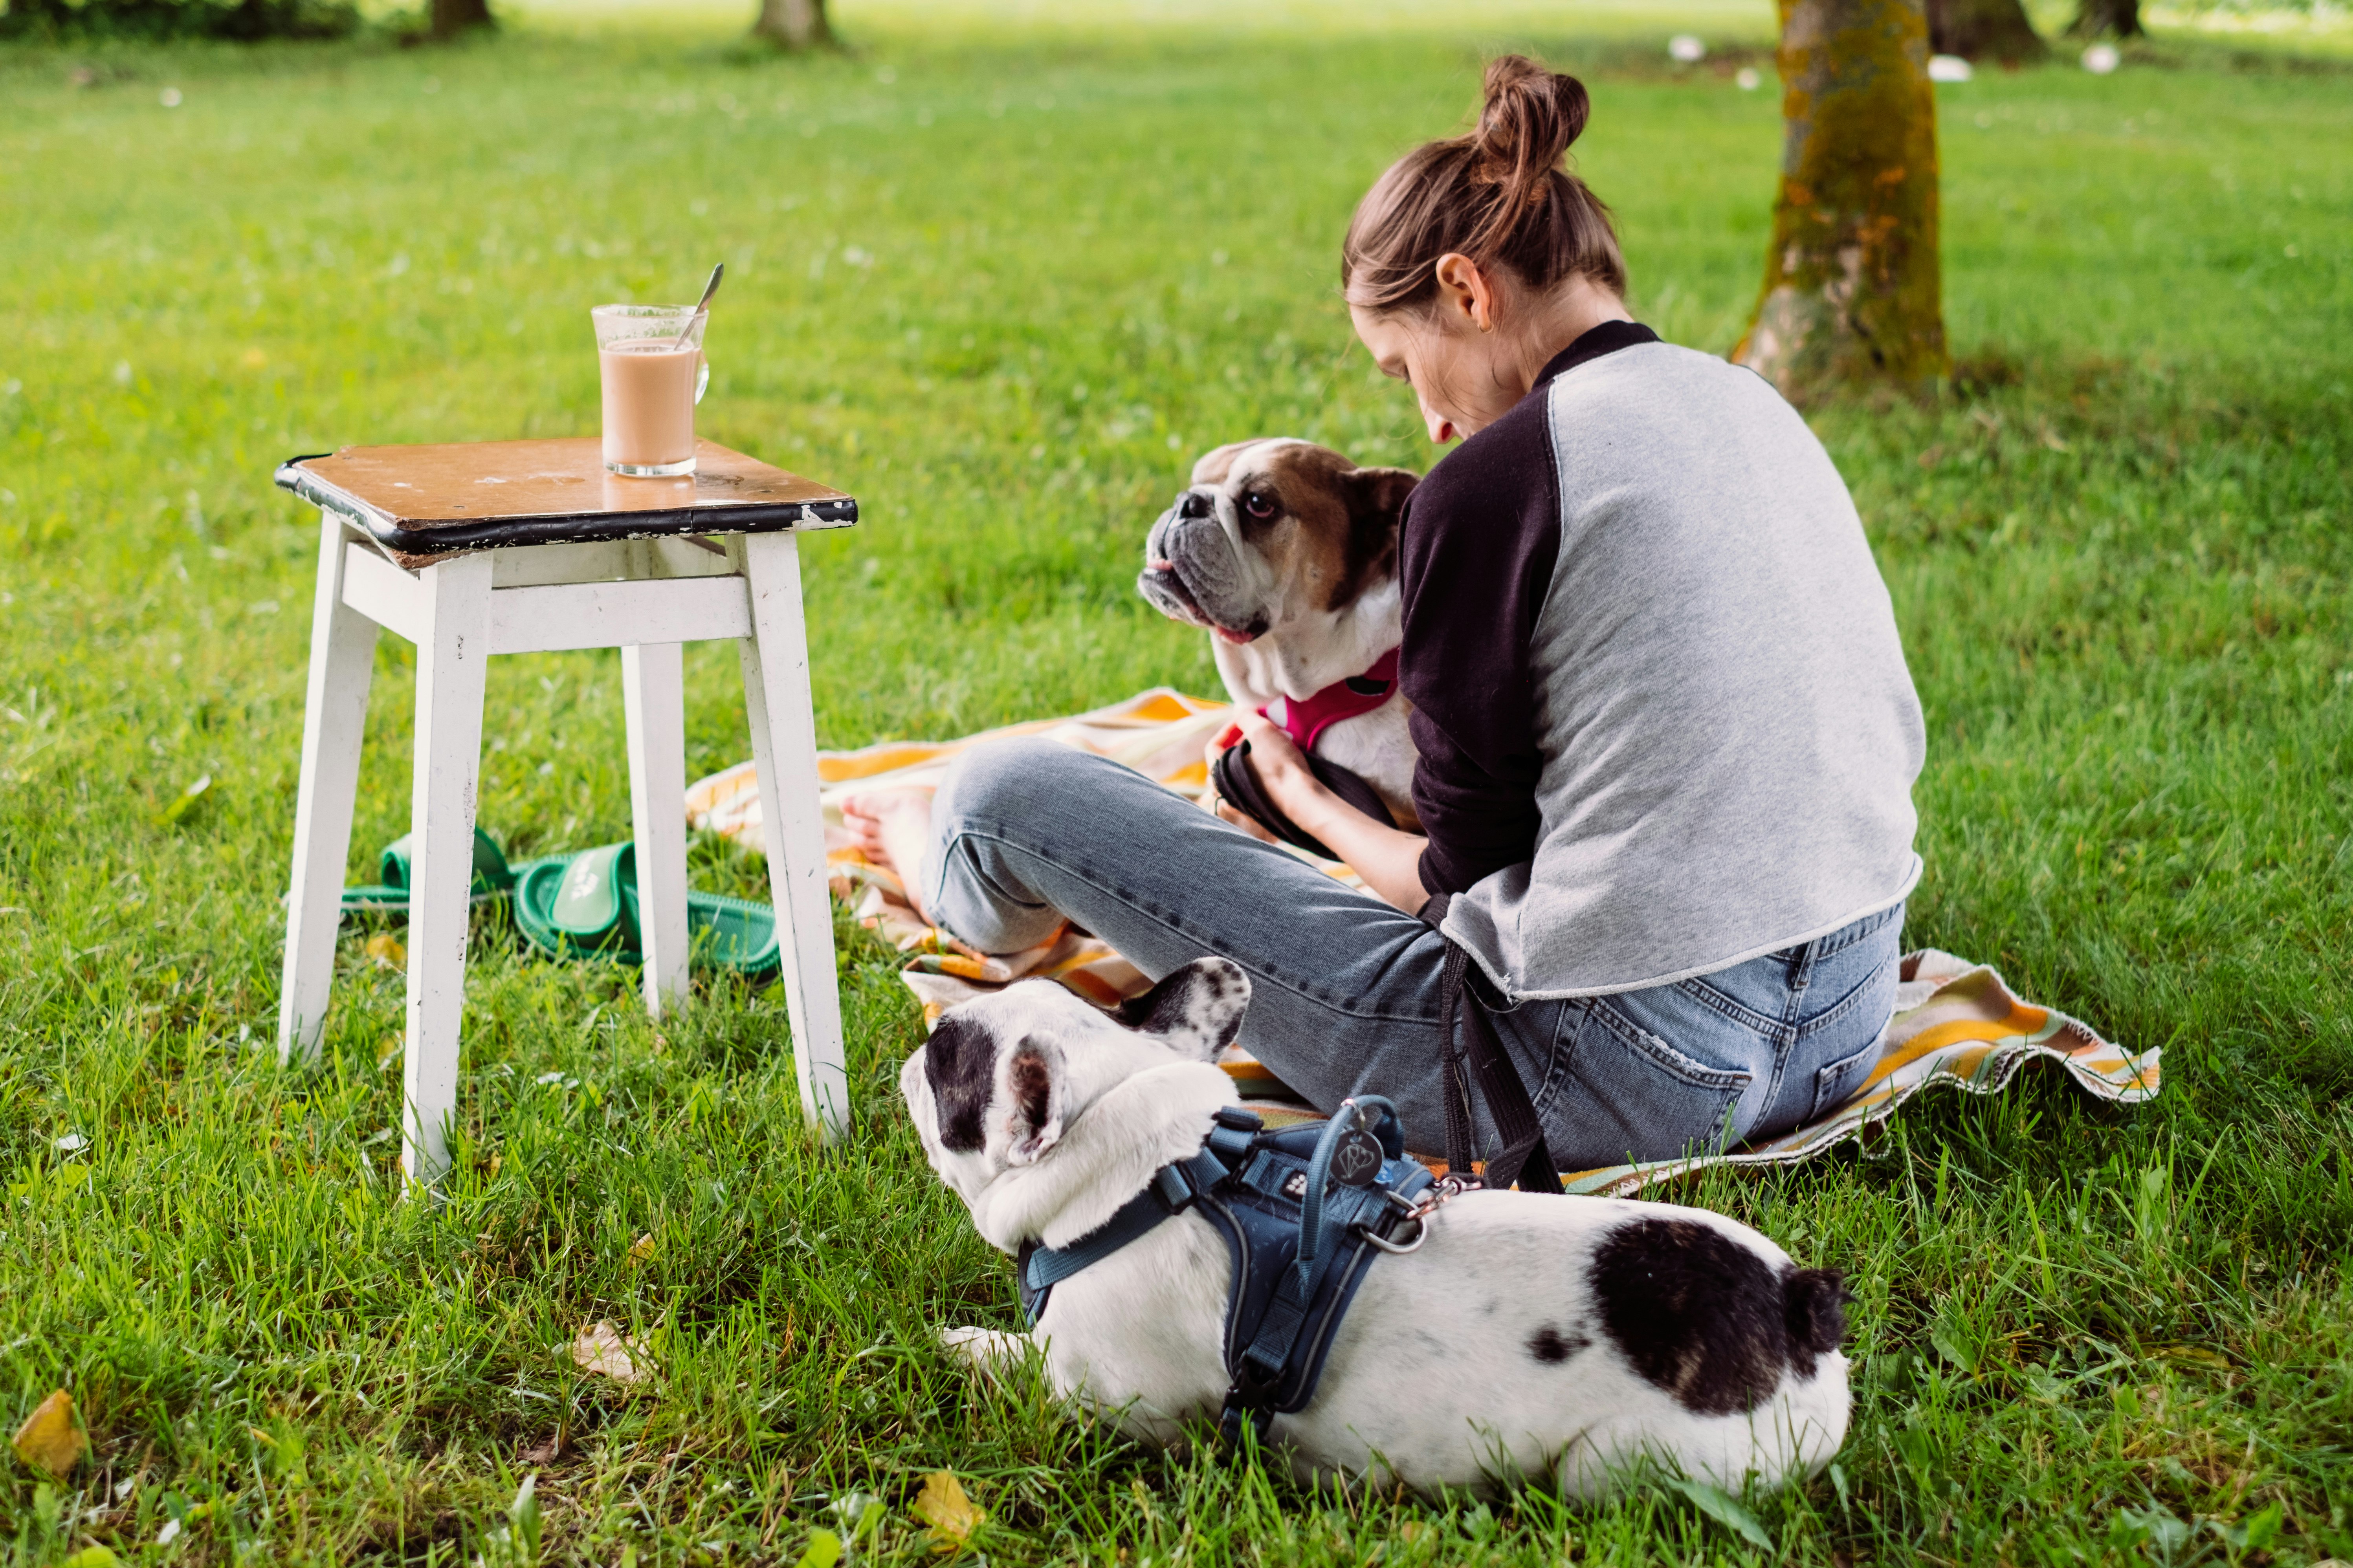 woman in gray shirt sitting on chair beside white and black short coated dog